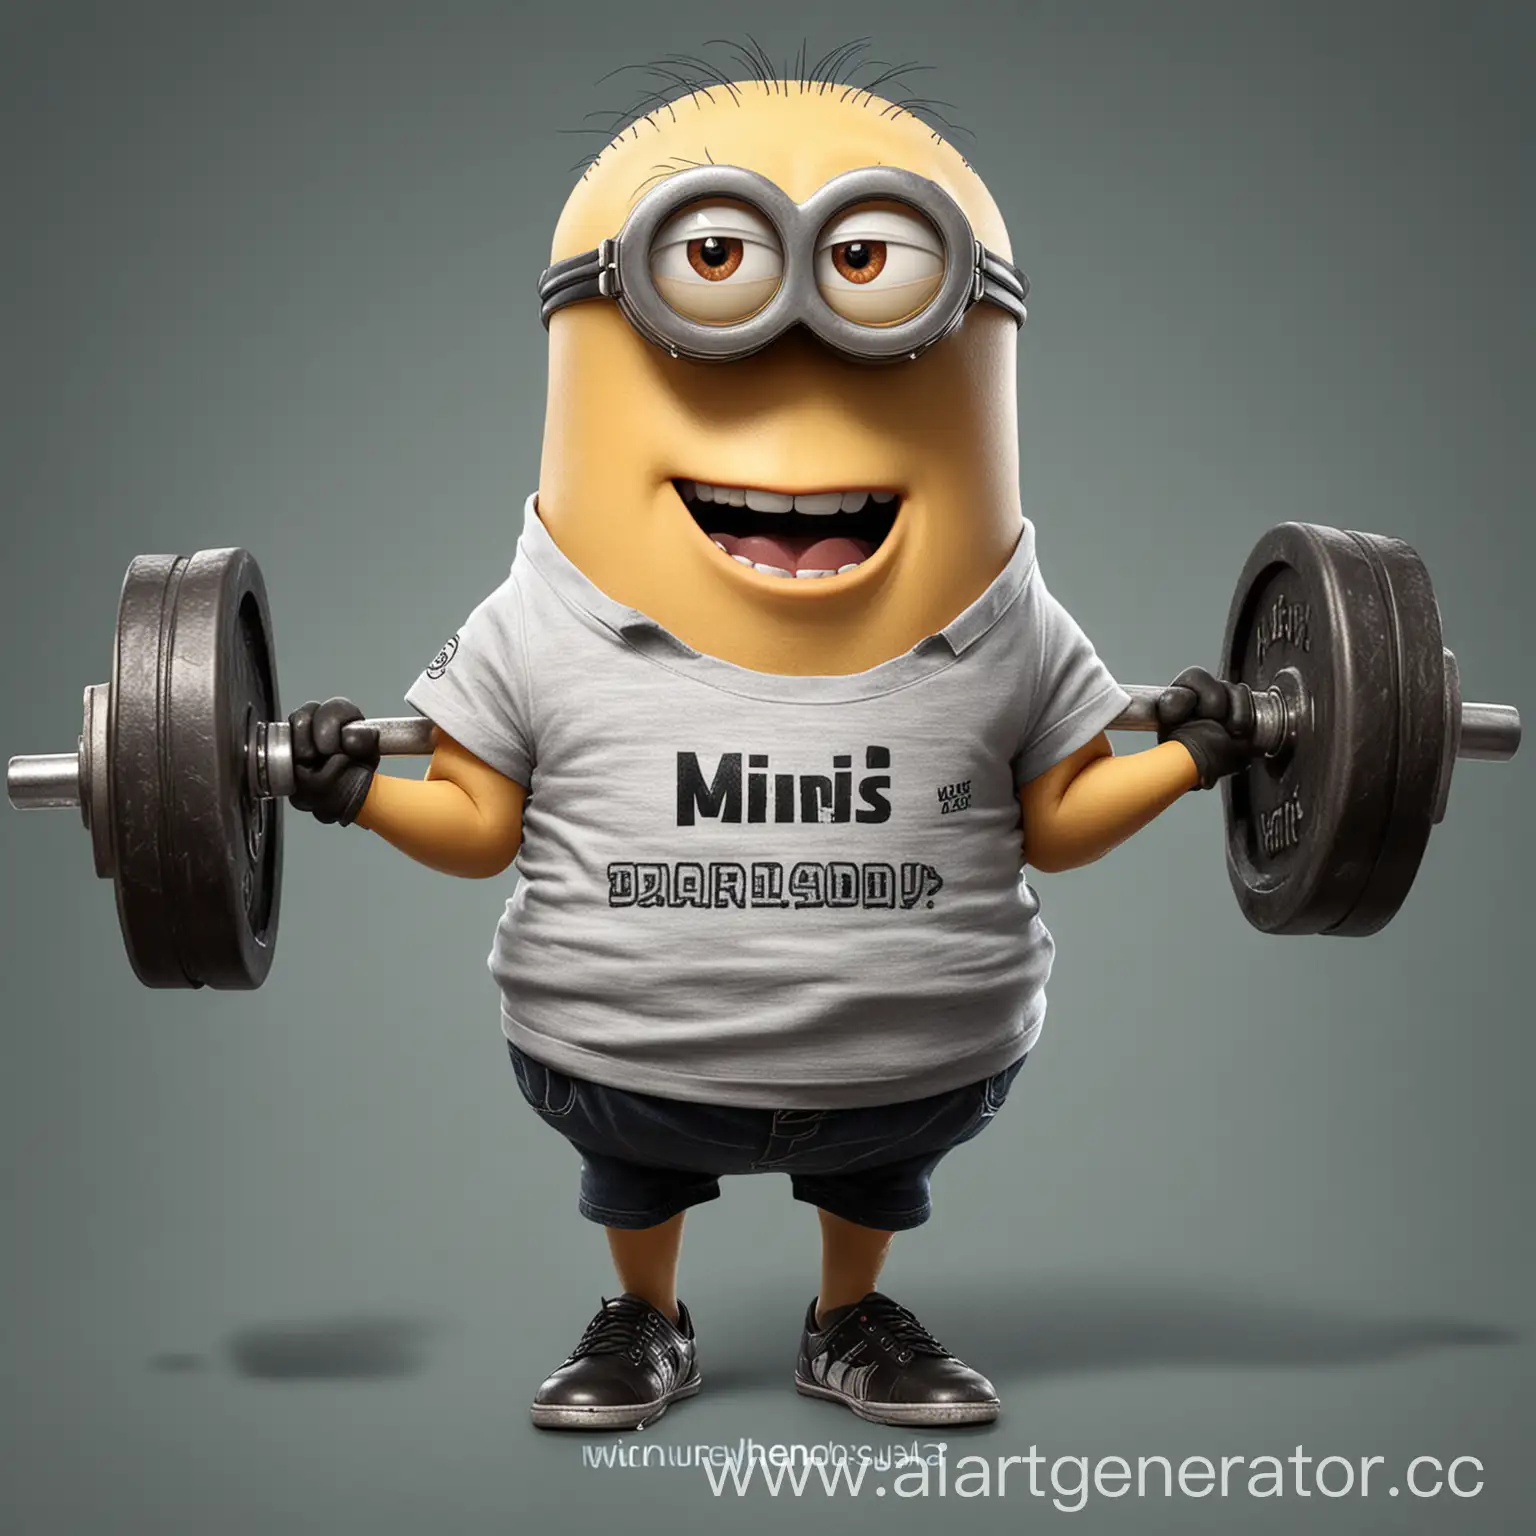 a cool minion with muscles is a jock, he lifts a barbell and shouts he is very businesslike, and on his T-shirt it says "DANIS"